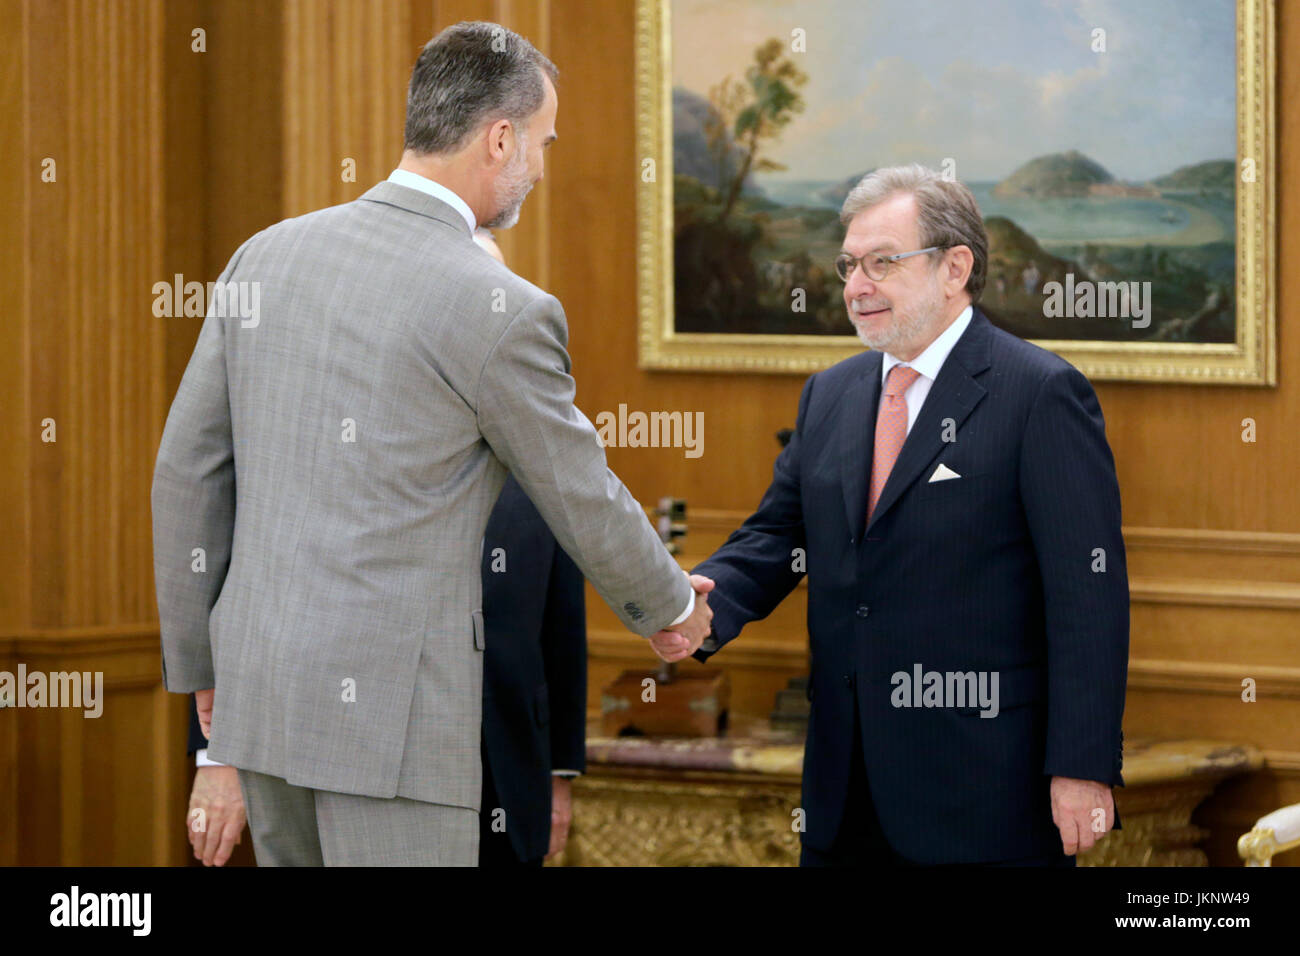 Madrid, Spain. 24th July, 2017. King Felipe VI of Spain during a audience with the Executive Commission of the Information Media Association at the Palacio de la Zarzuela in Madrid Monday 24 July 2017 Credit: Gtres Información más Comuniación on line,S.L./Alamy Live News Stock Photo